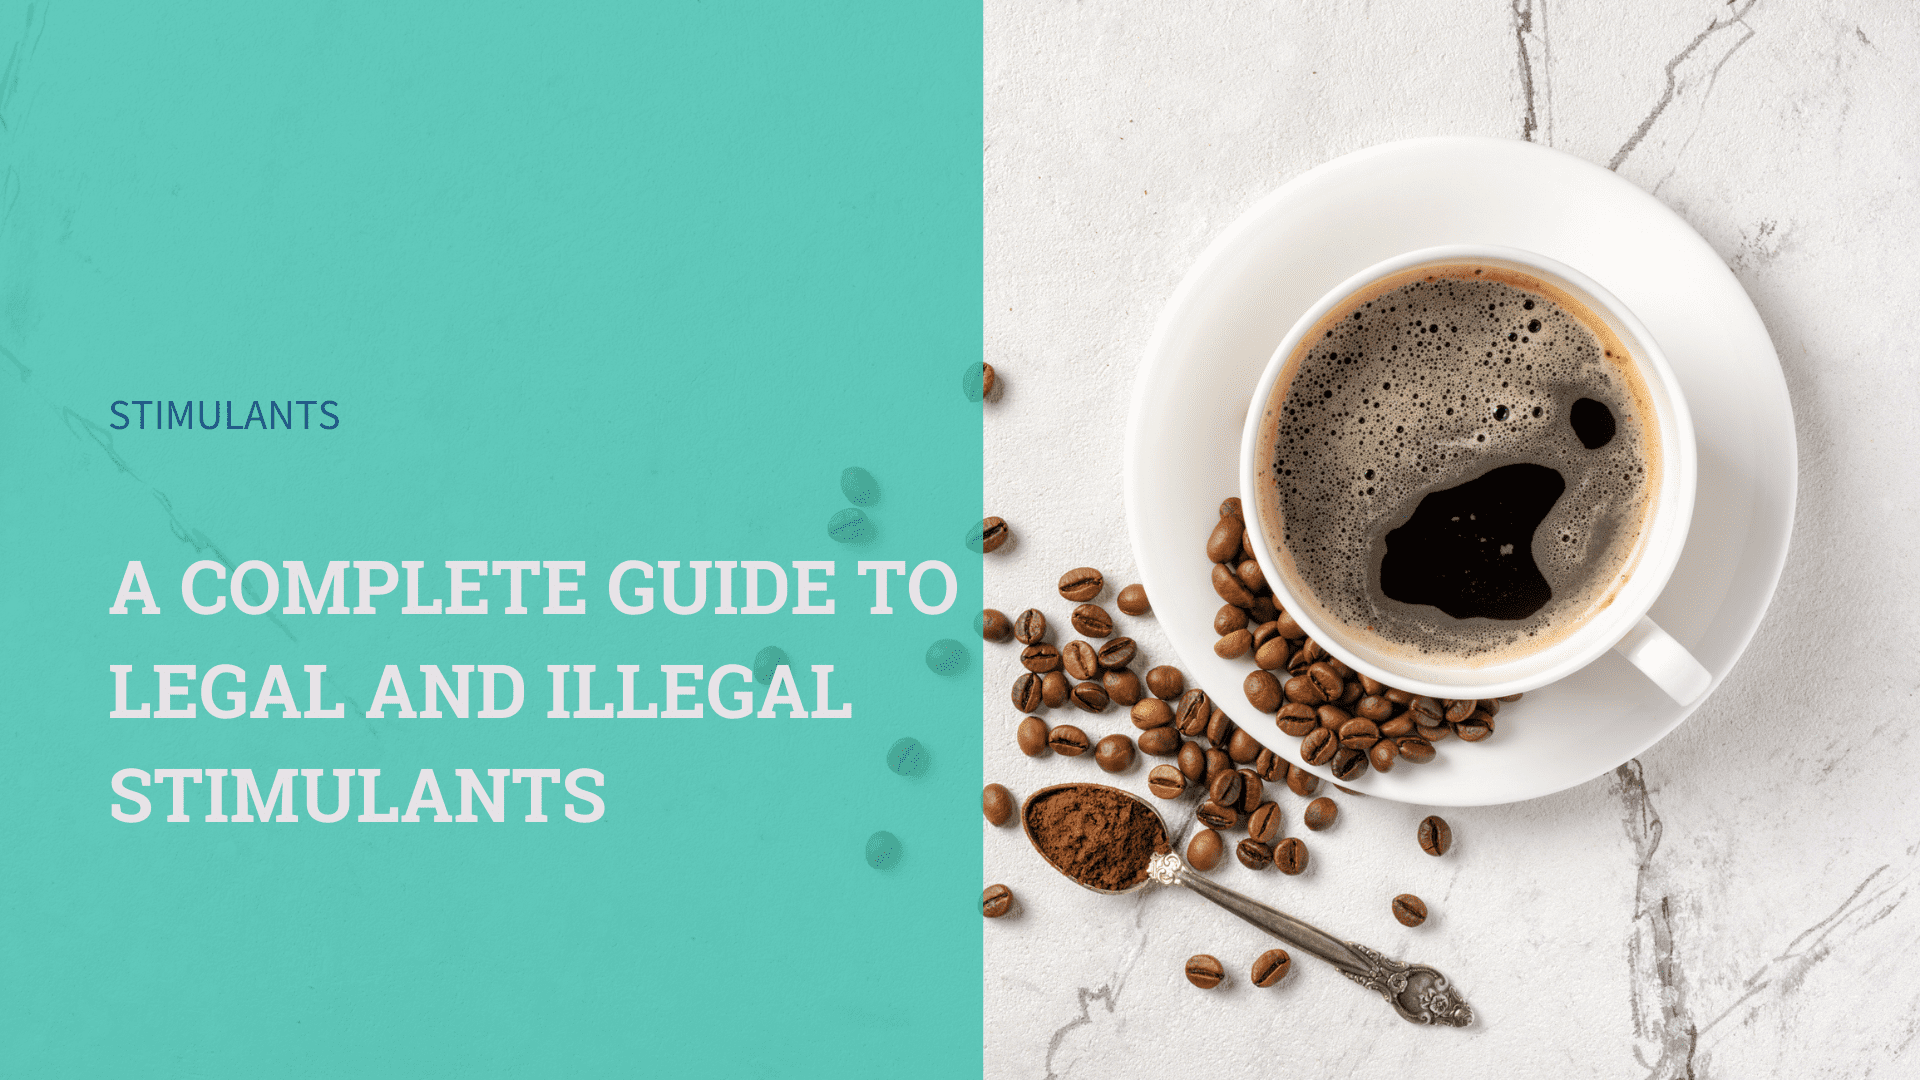 A Complete Guide to Legal and Illegal Stimulants